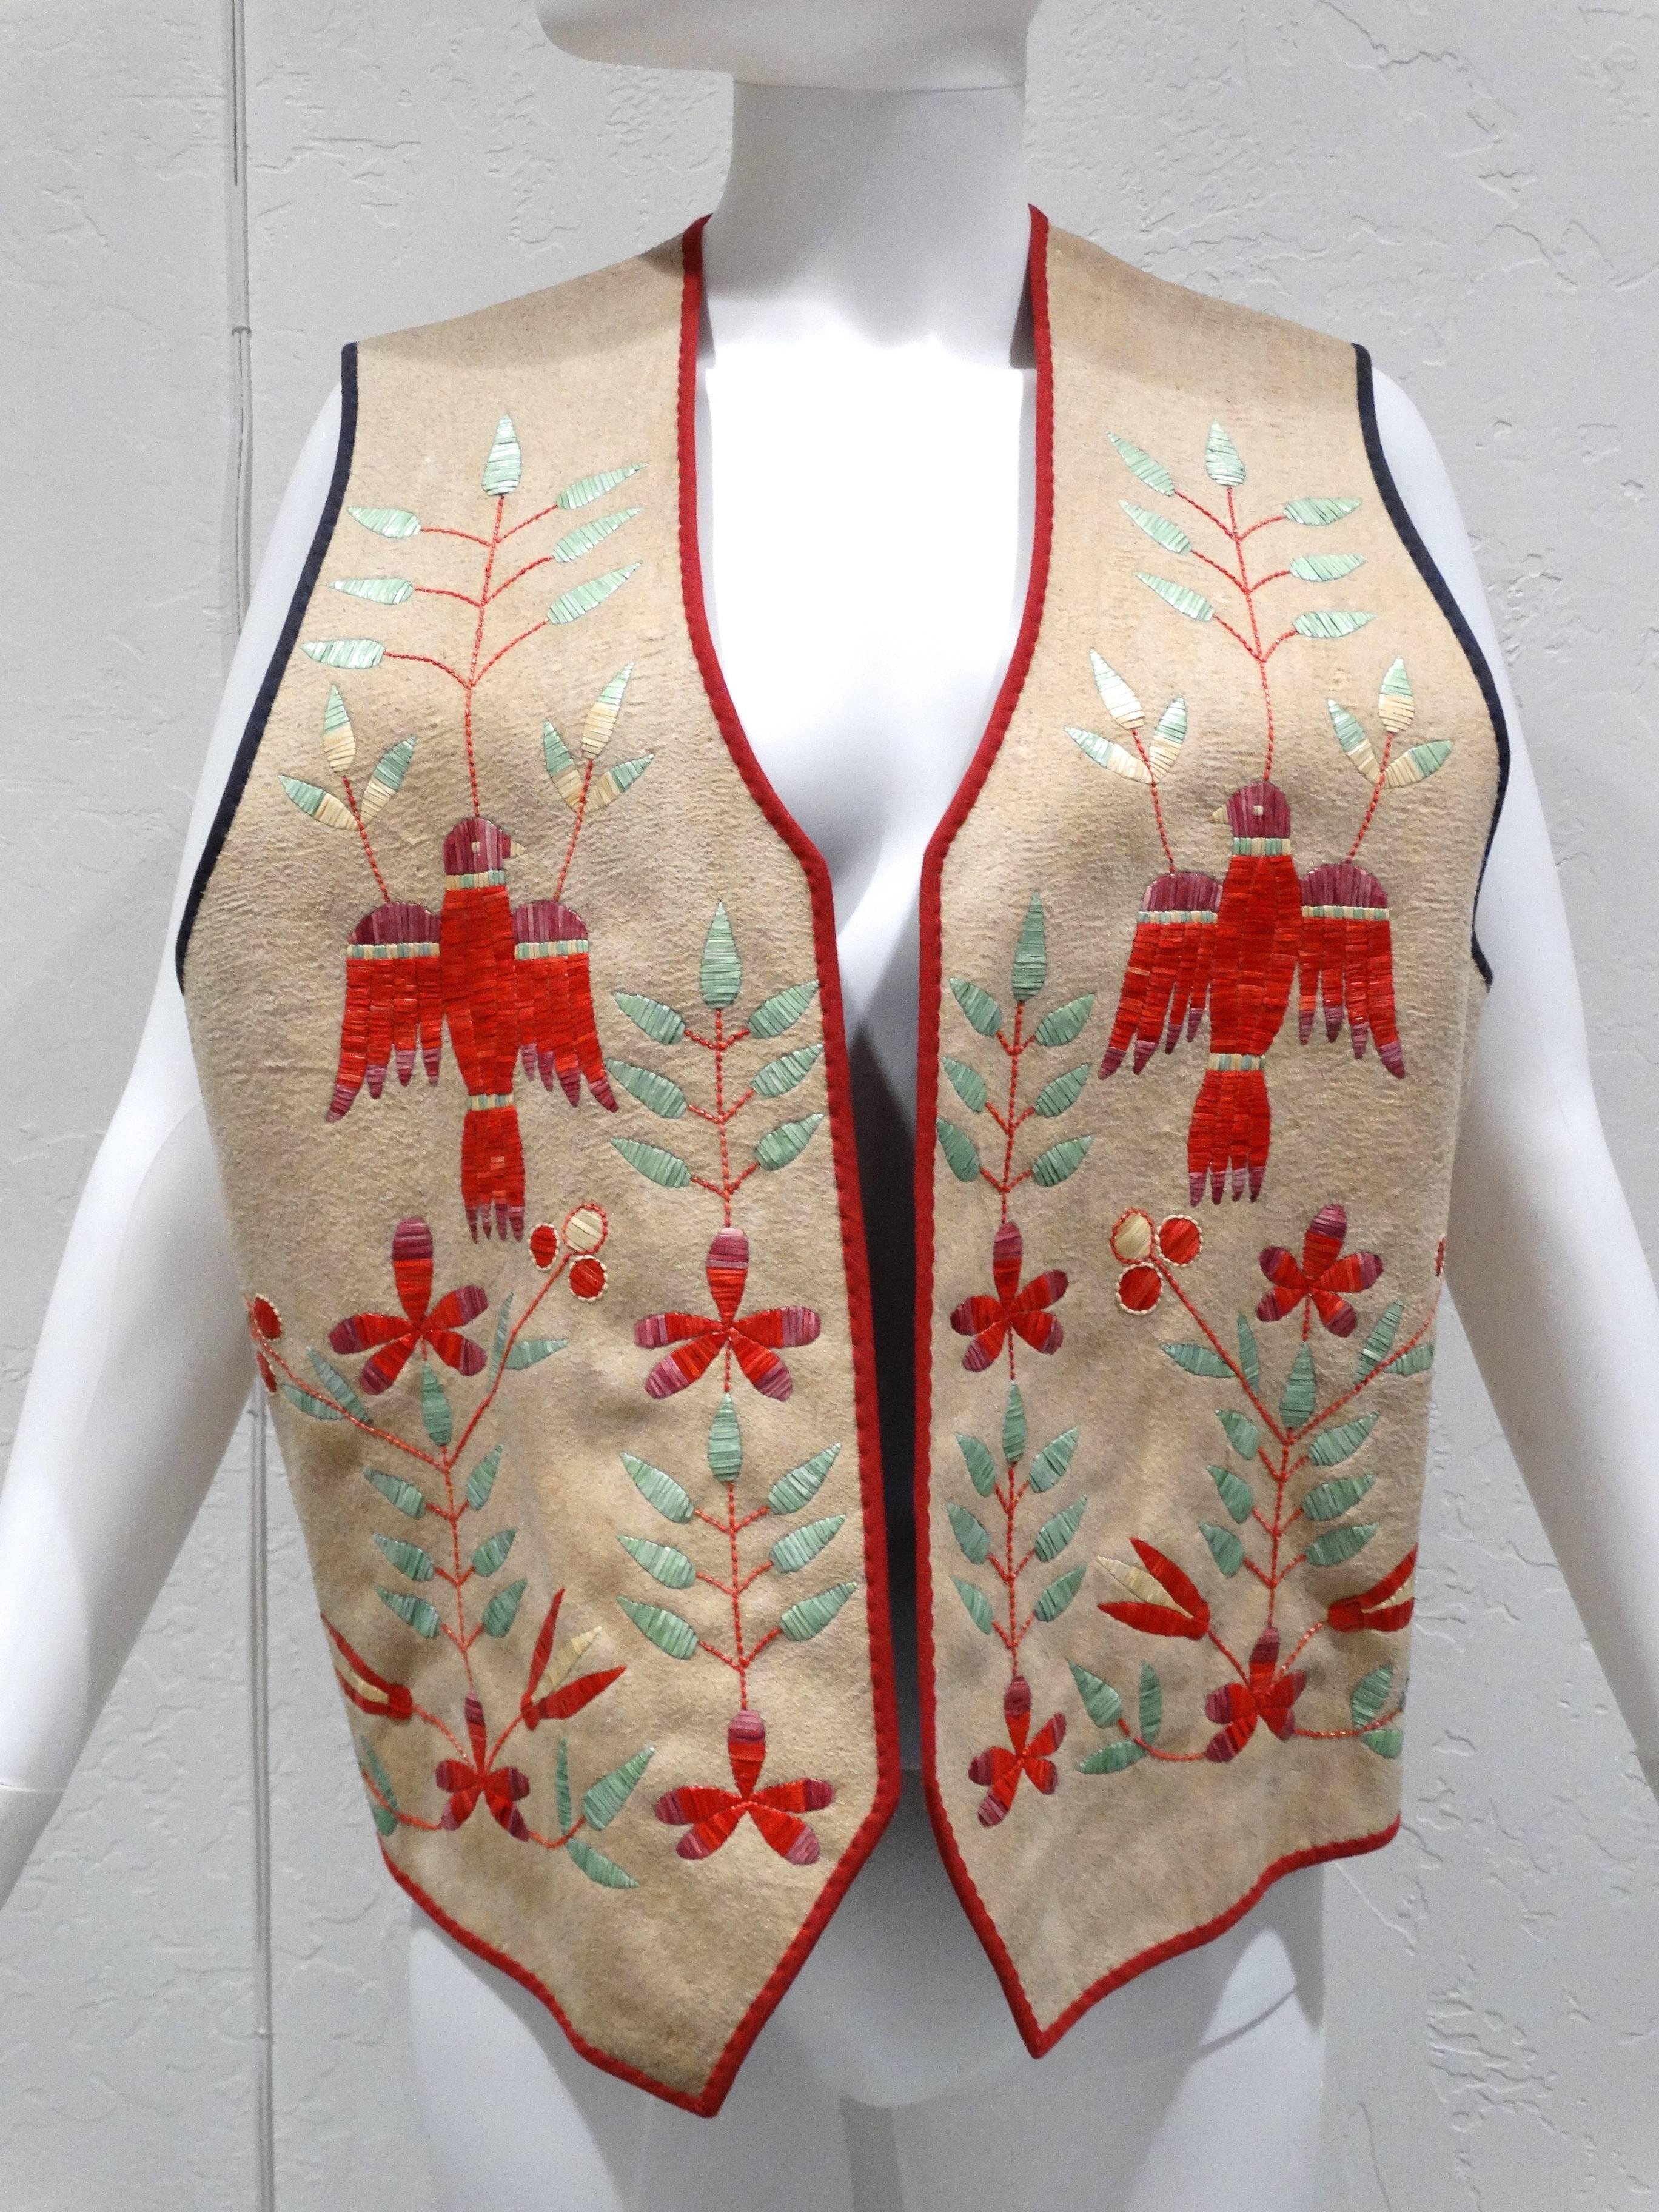 Rare 1940's Quillwork Vest is in beautiful natural buckskin, vest features stunning quillwork embroidery! The motif of florals and birds are stunning, hand dyed in the perfect pantone palette for spring. The vest's inside is quilted cotton and the